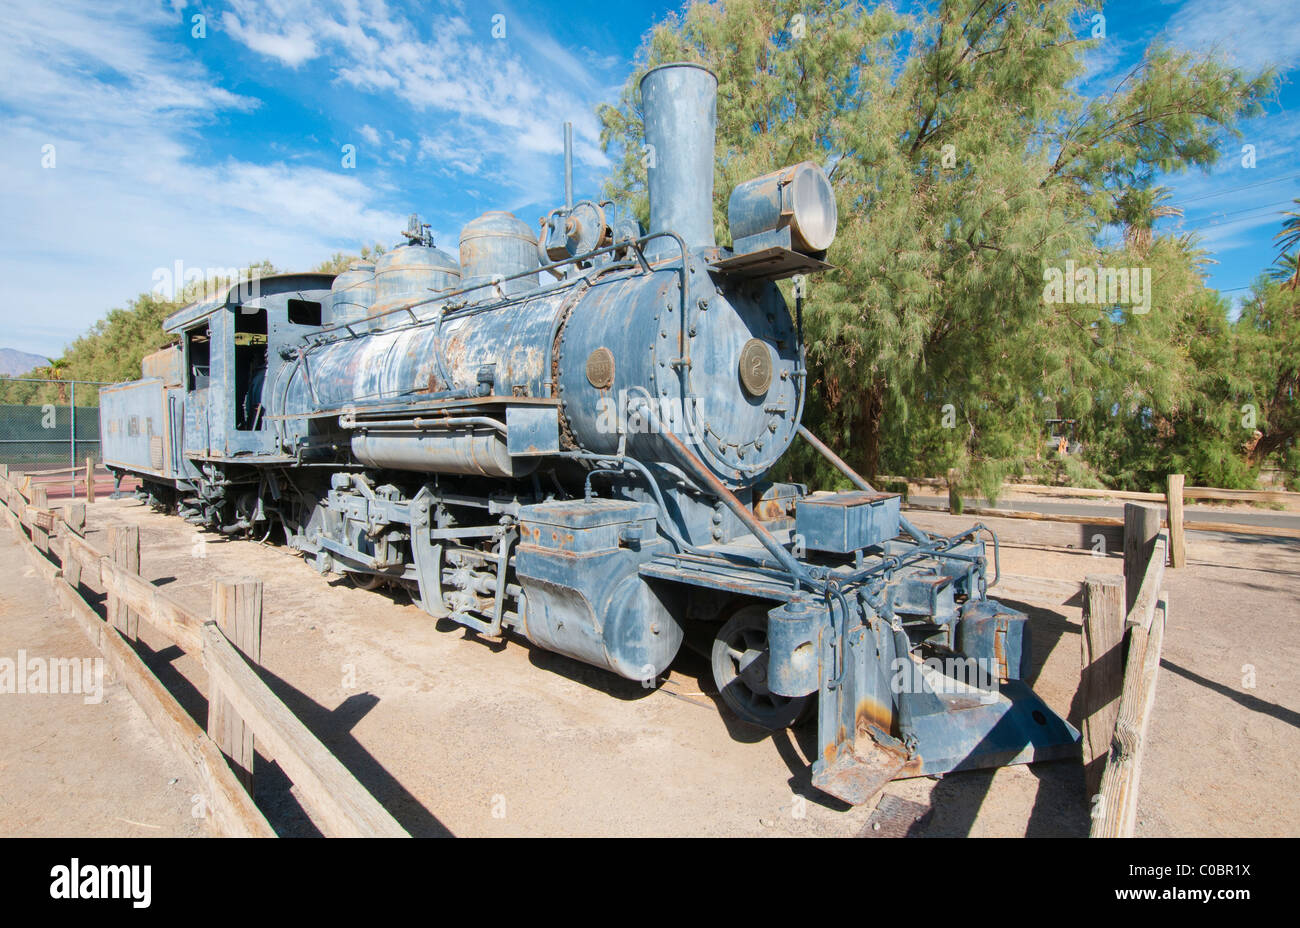 The oil burning Baldwin 280 locomotive carried borate ore from mines at Ryan to the mainline railroad at Death Valley junction Stock Photo